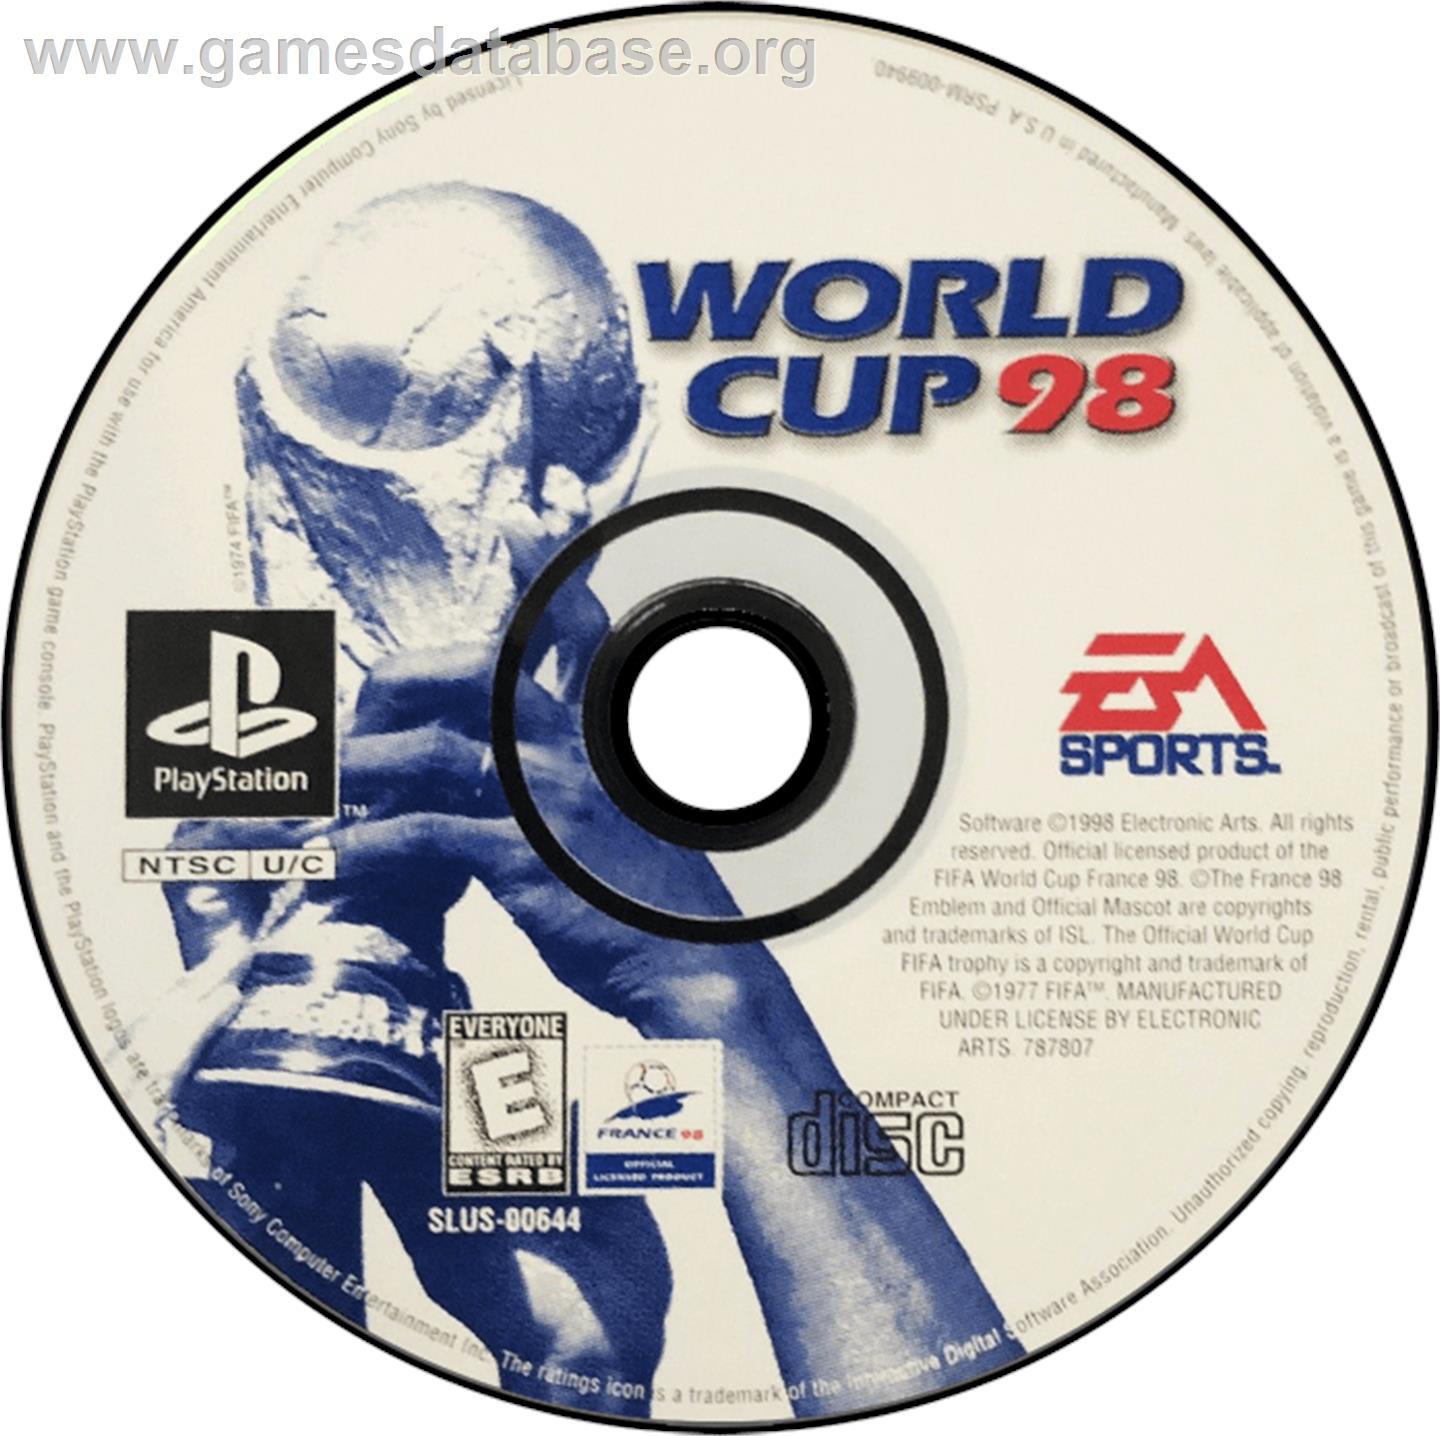 World Cup 98 - Sony Playstation - Artwork - Disc